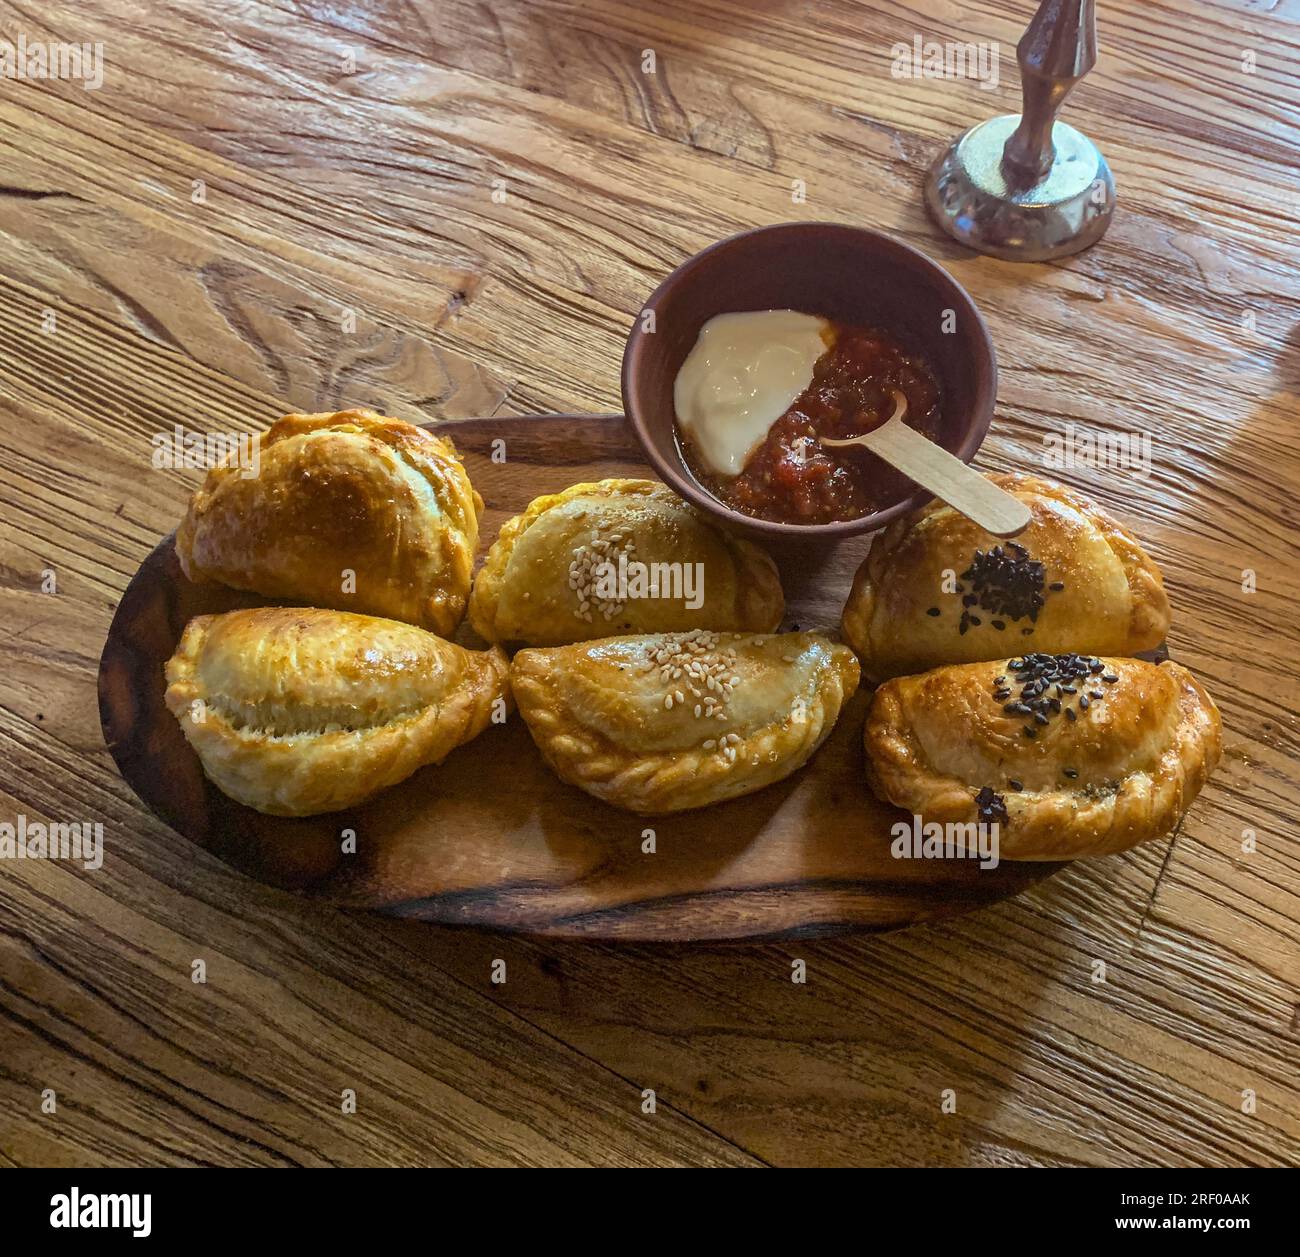 Kazakhstan, Almaty. Samsa Pastry Filled with Mushrooms, Pumpkin, or Horsemeat (left to right). Stock Photo